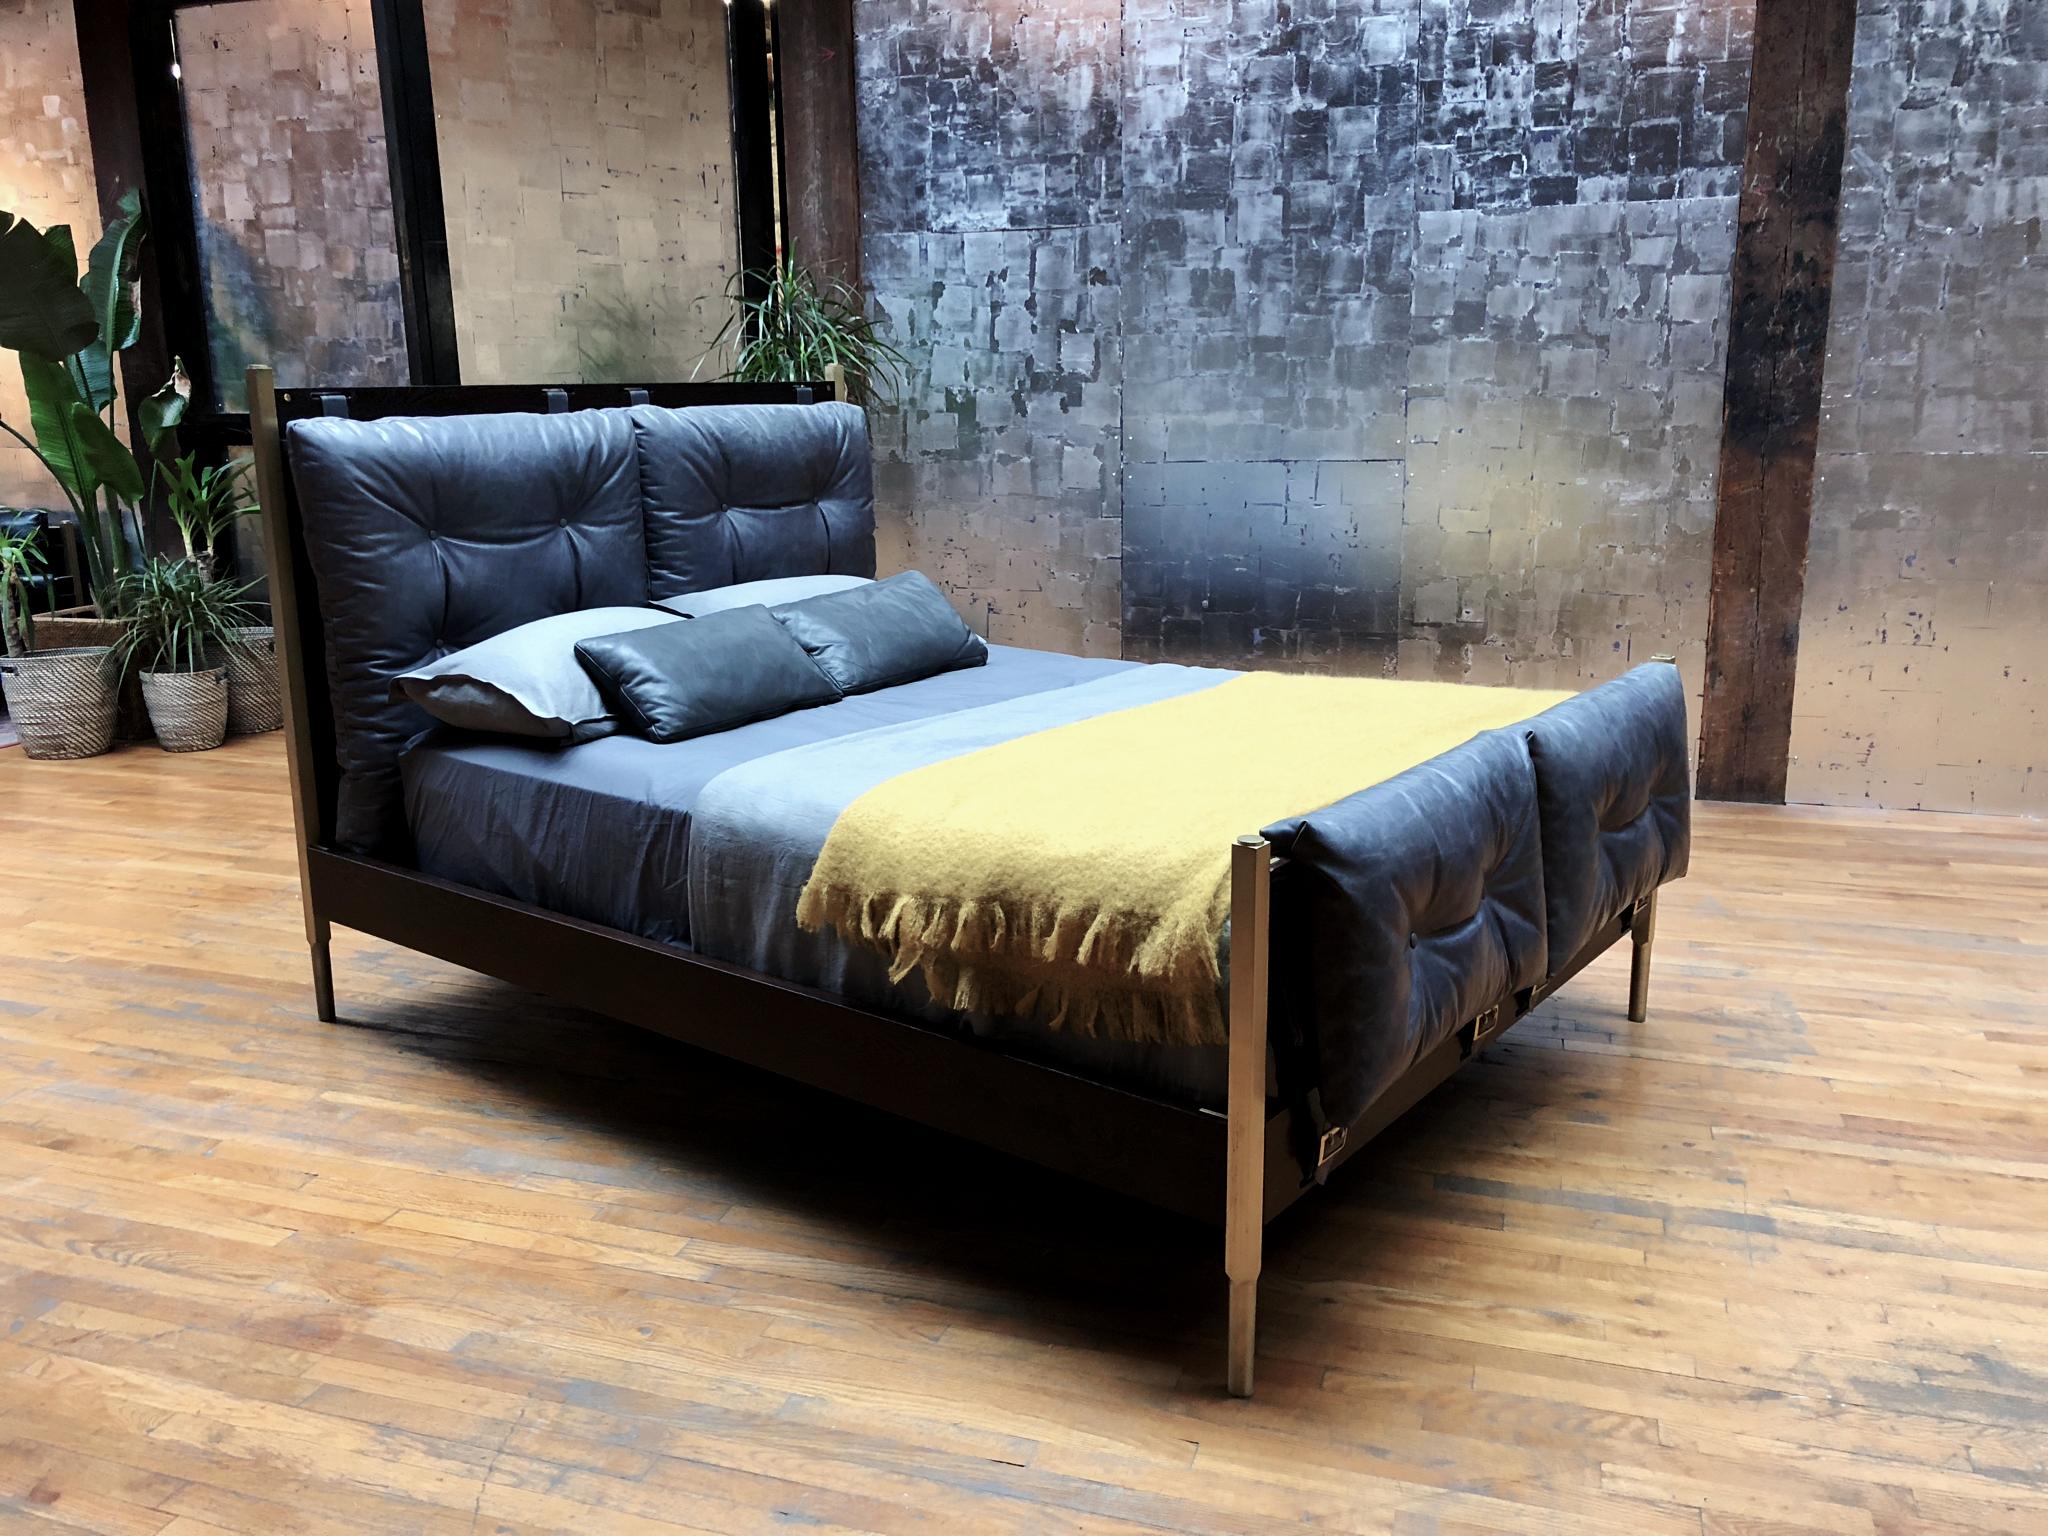 The Campanha collection displays DLV’s take on classical Campaign furniture. Infused with a rugged-meets-refined aesthetic, the collection’s tufted leather upholstery details are offset by careful and precise facets of gleaming turned brass and